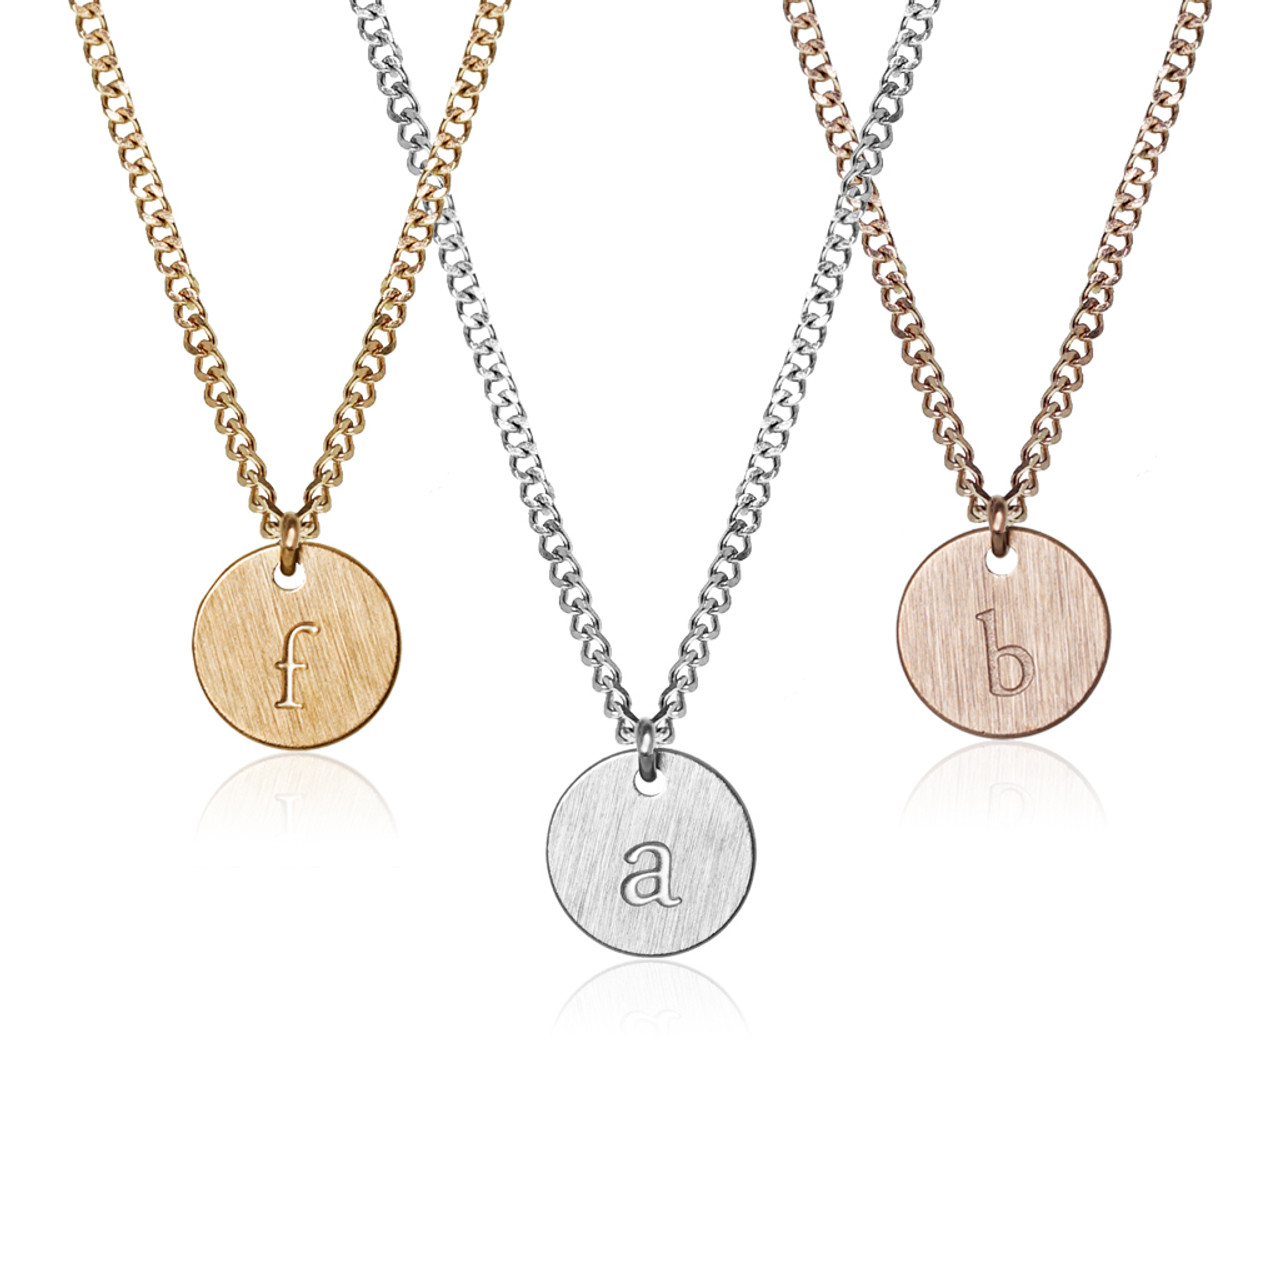 Lowercase Monogram on Curb Chain Necklace - FAB Accessories Inc.